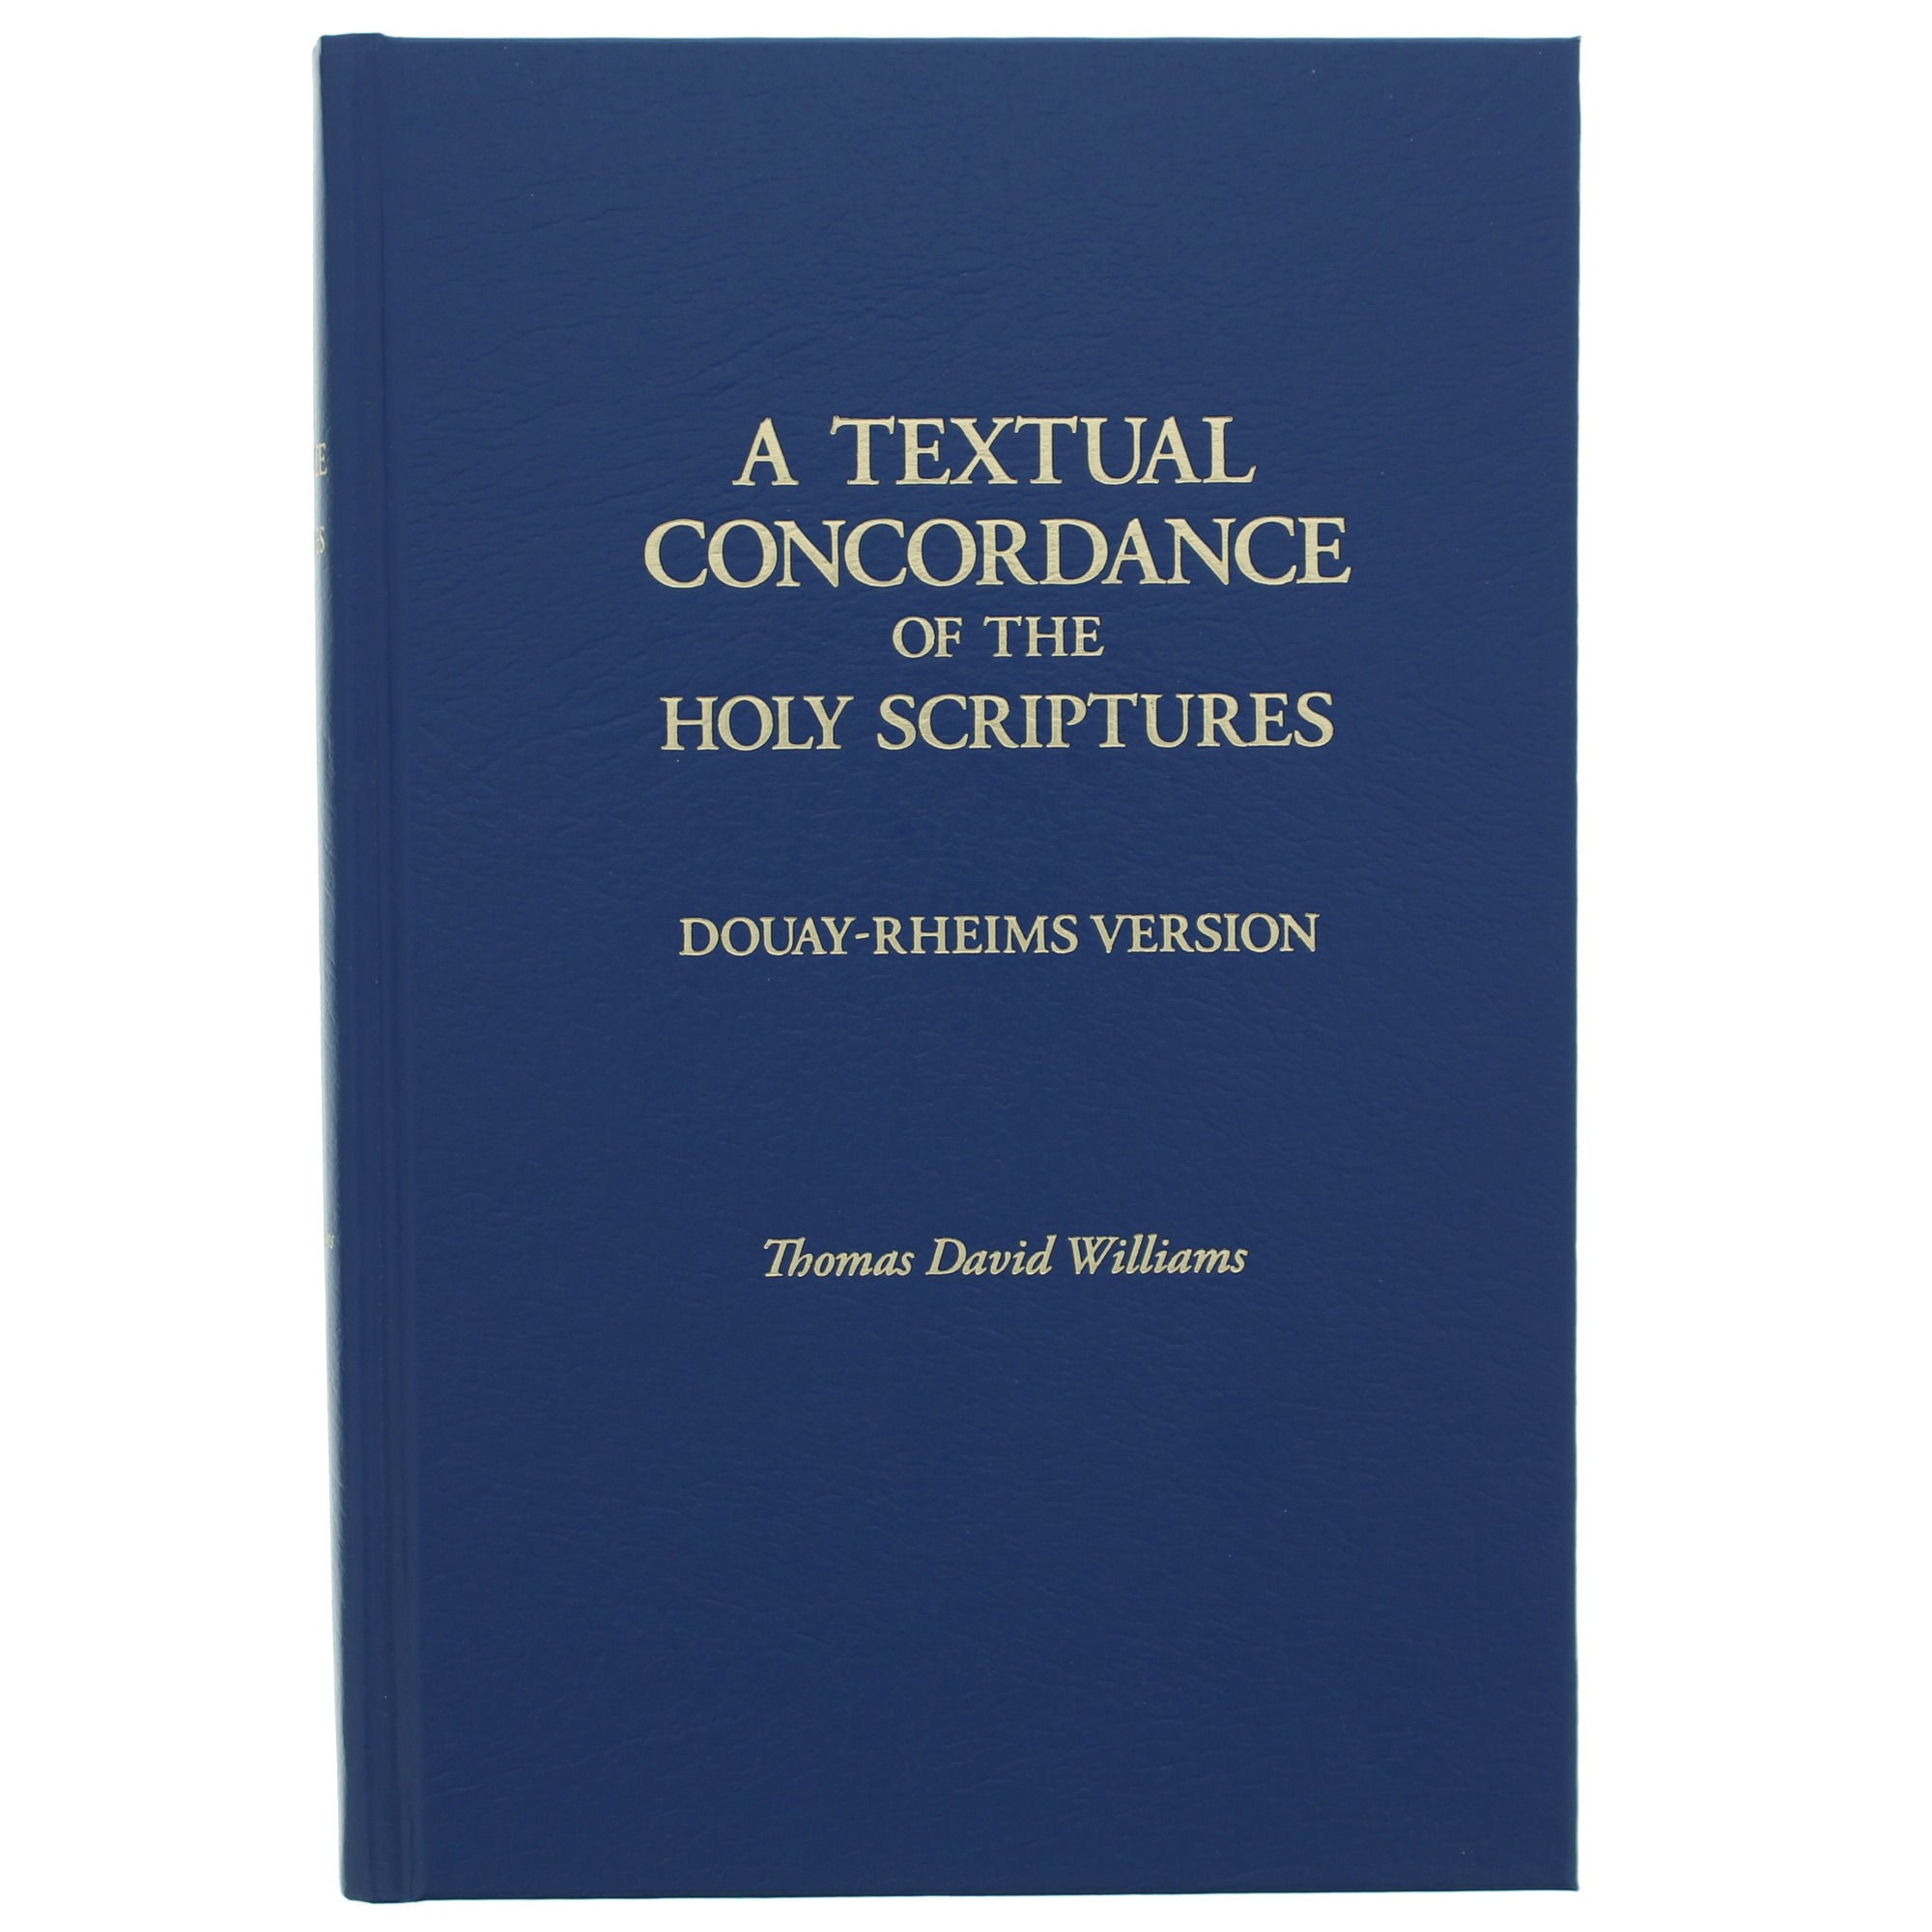 A Textual Concordance of Holy Scripture (Douay-Rheims) | The Catholic ...